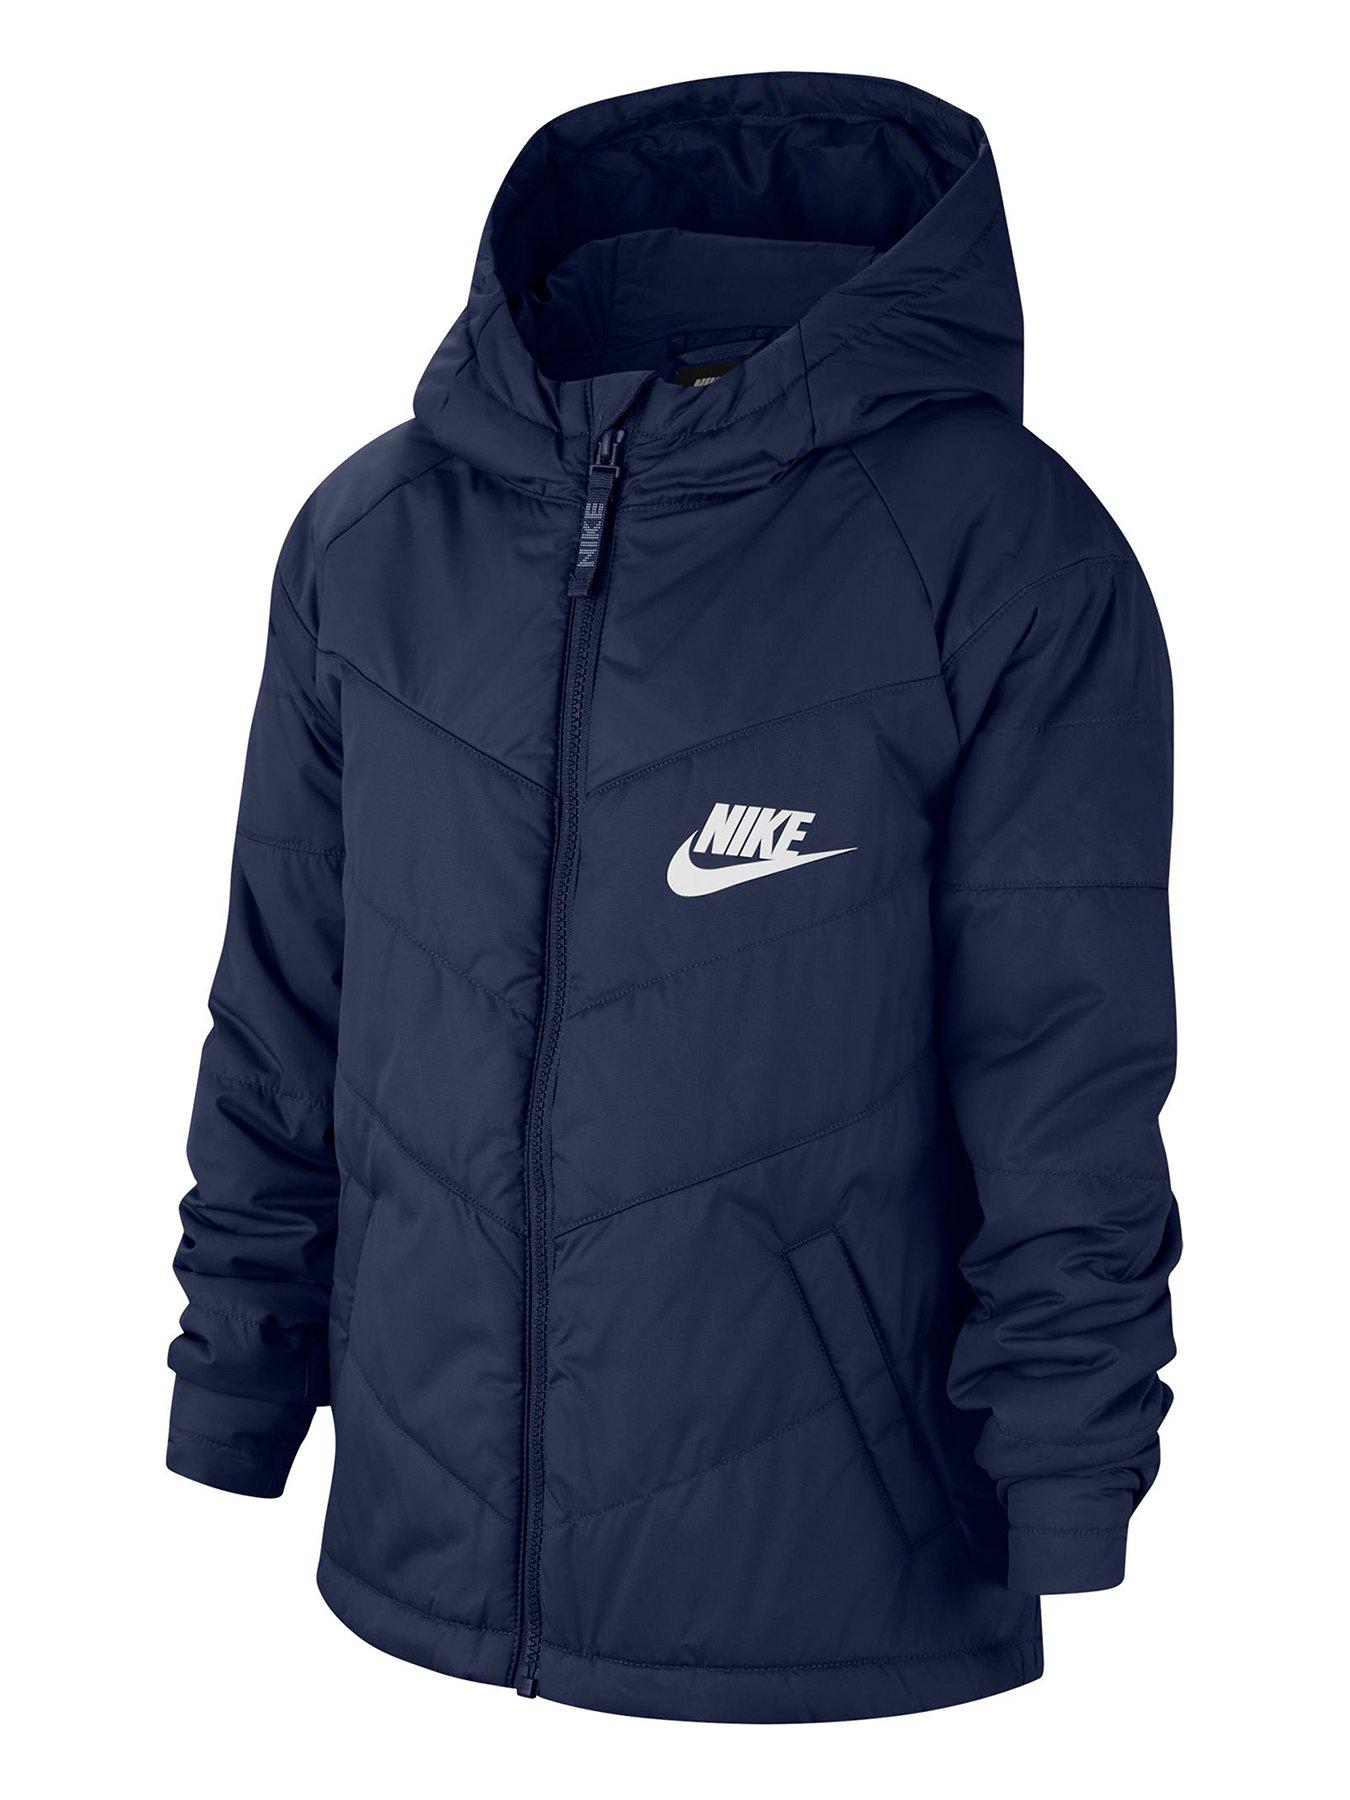 how to get nike clothes for cheap